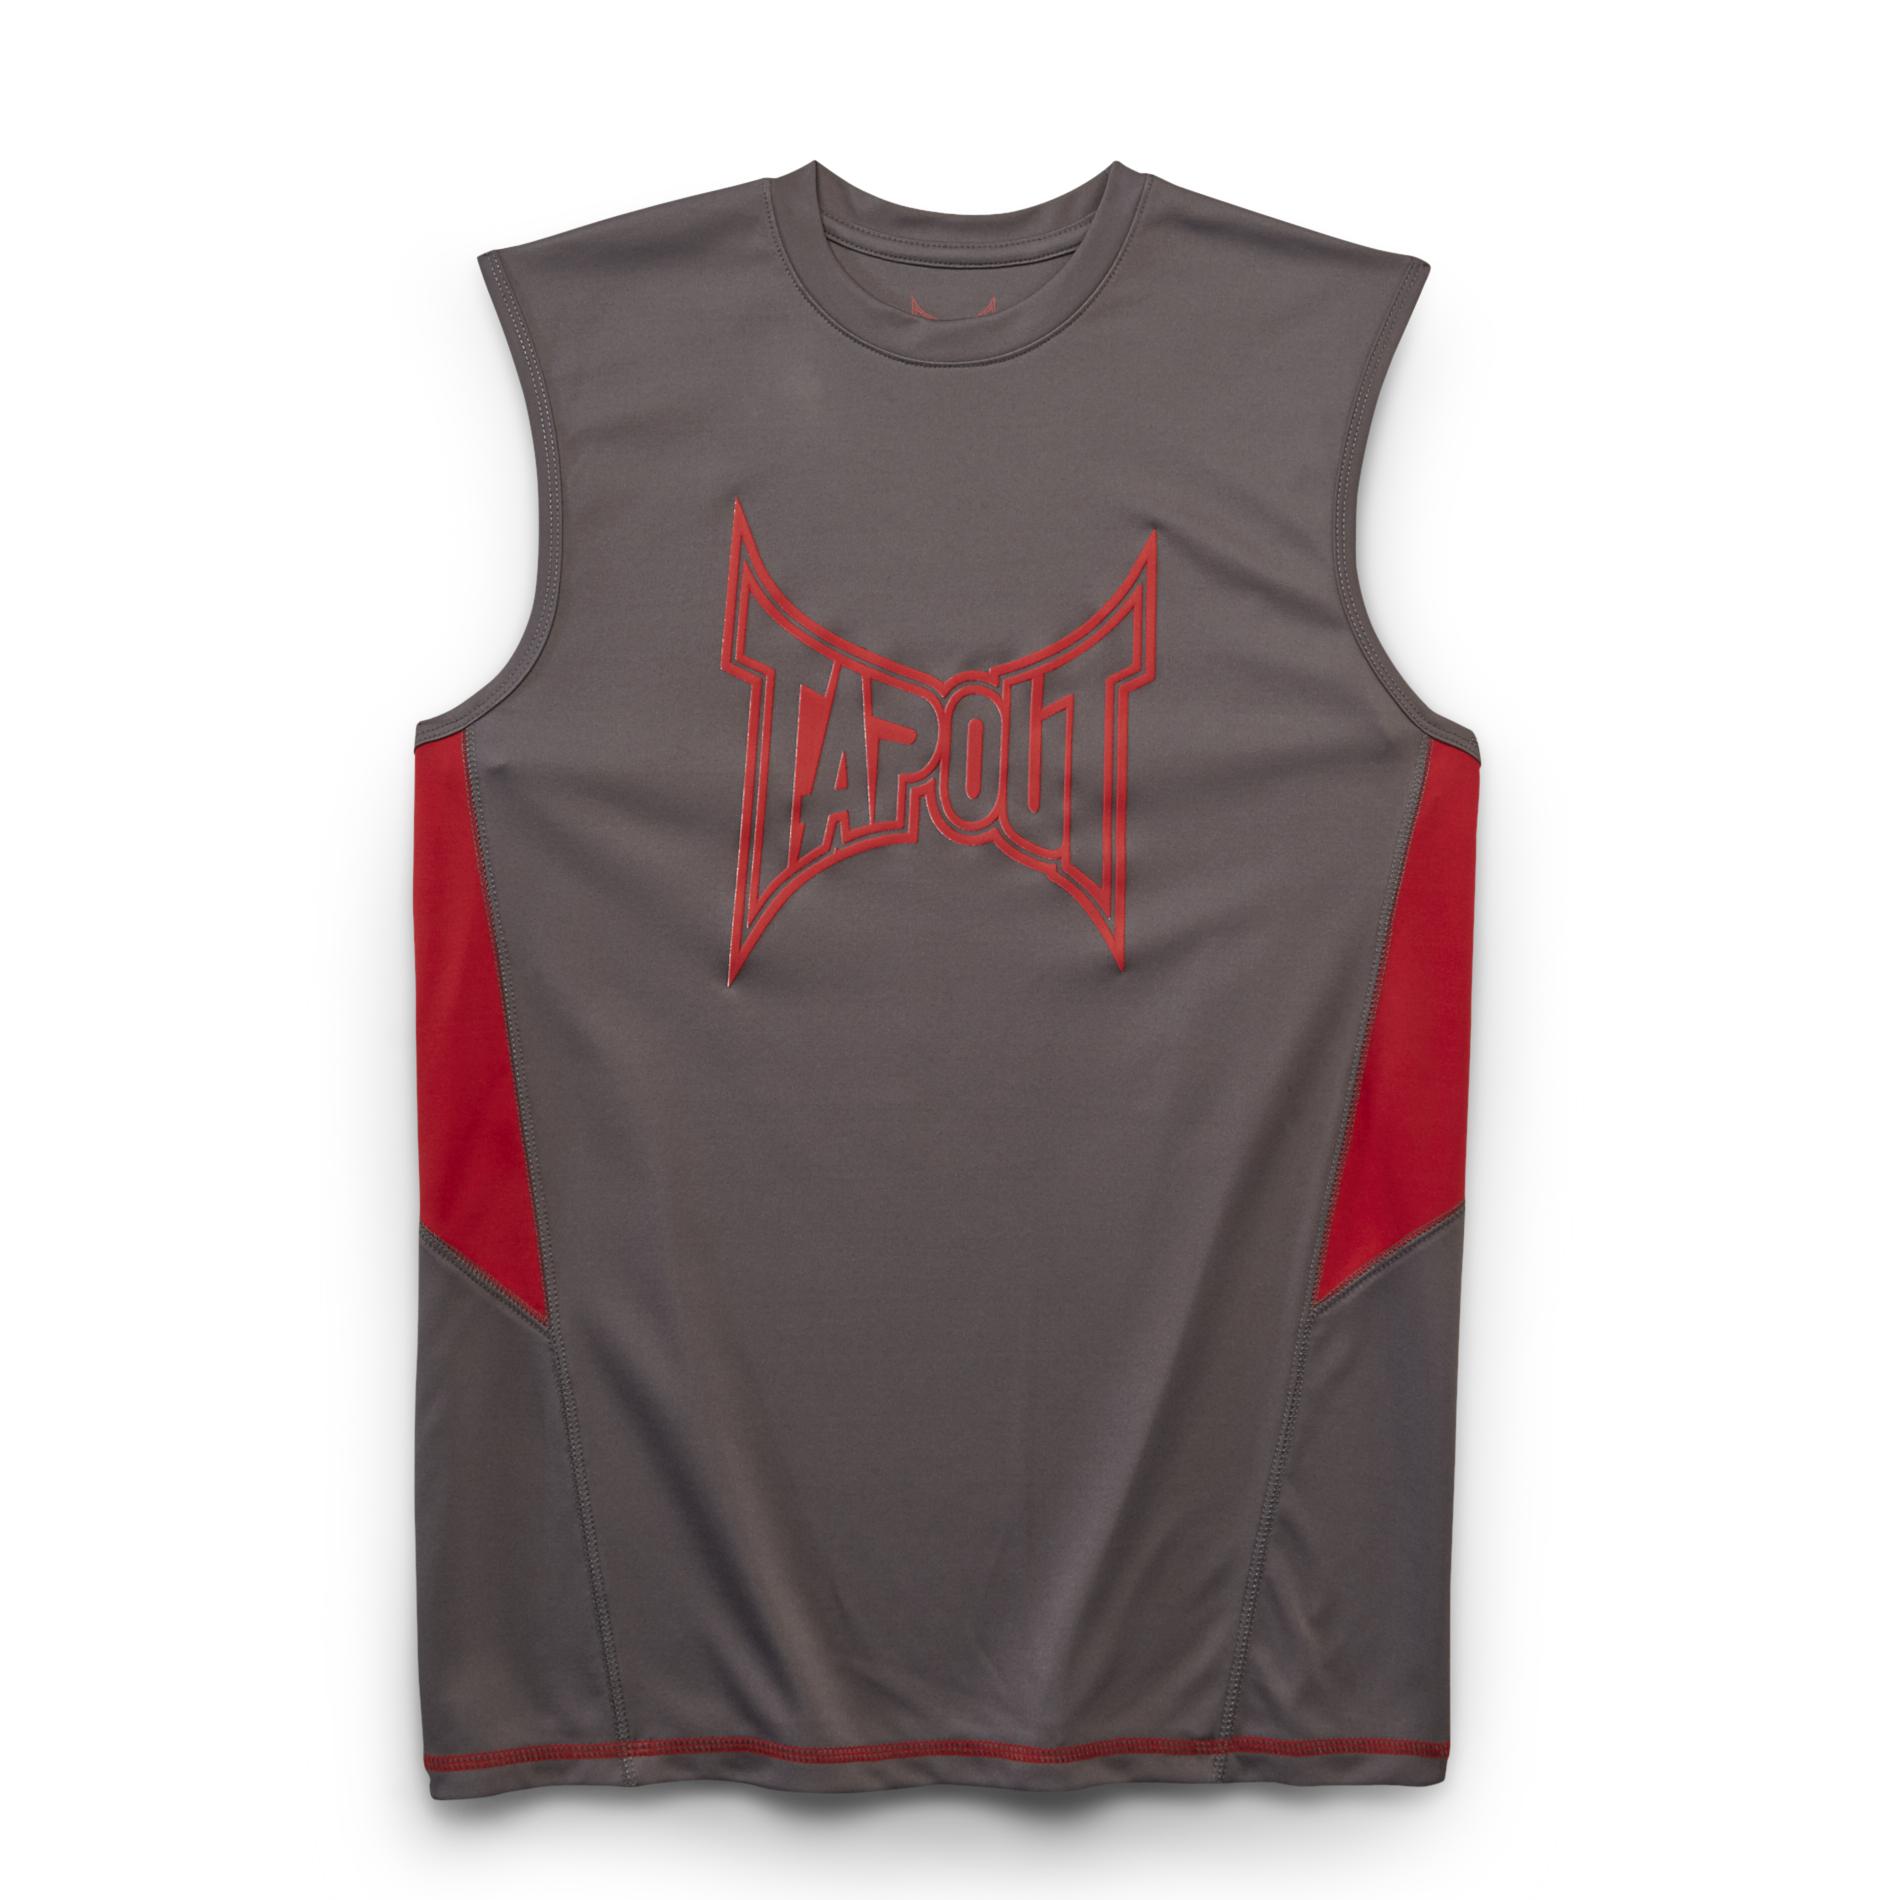 TapouT Young Men's Muscle T-Shirt